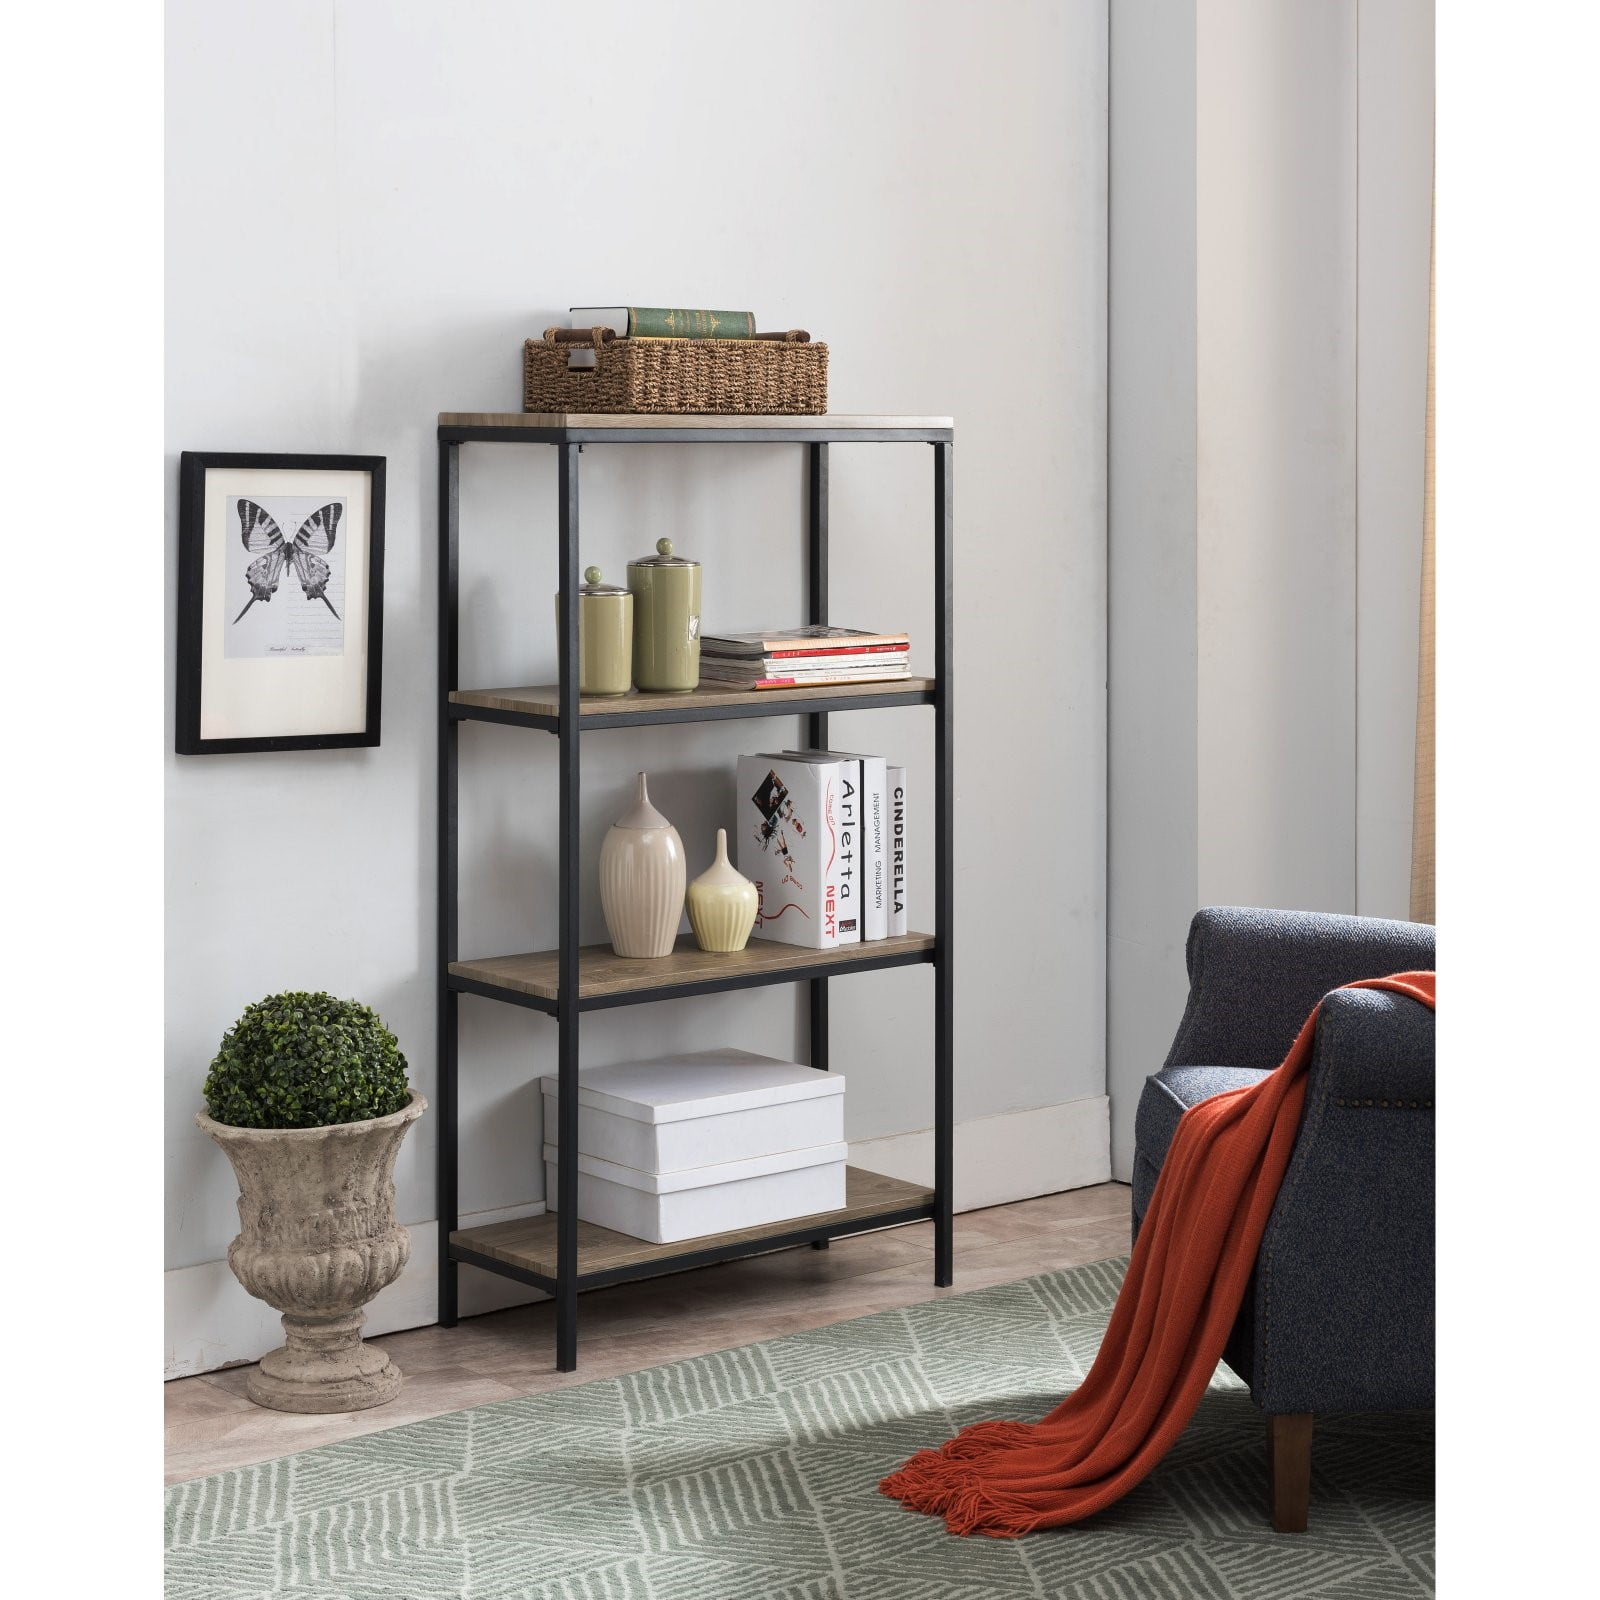 New Walmart Bookcases Wood for Large Space